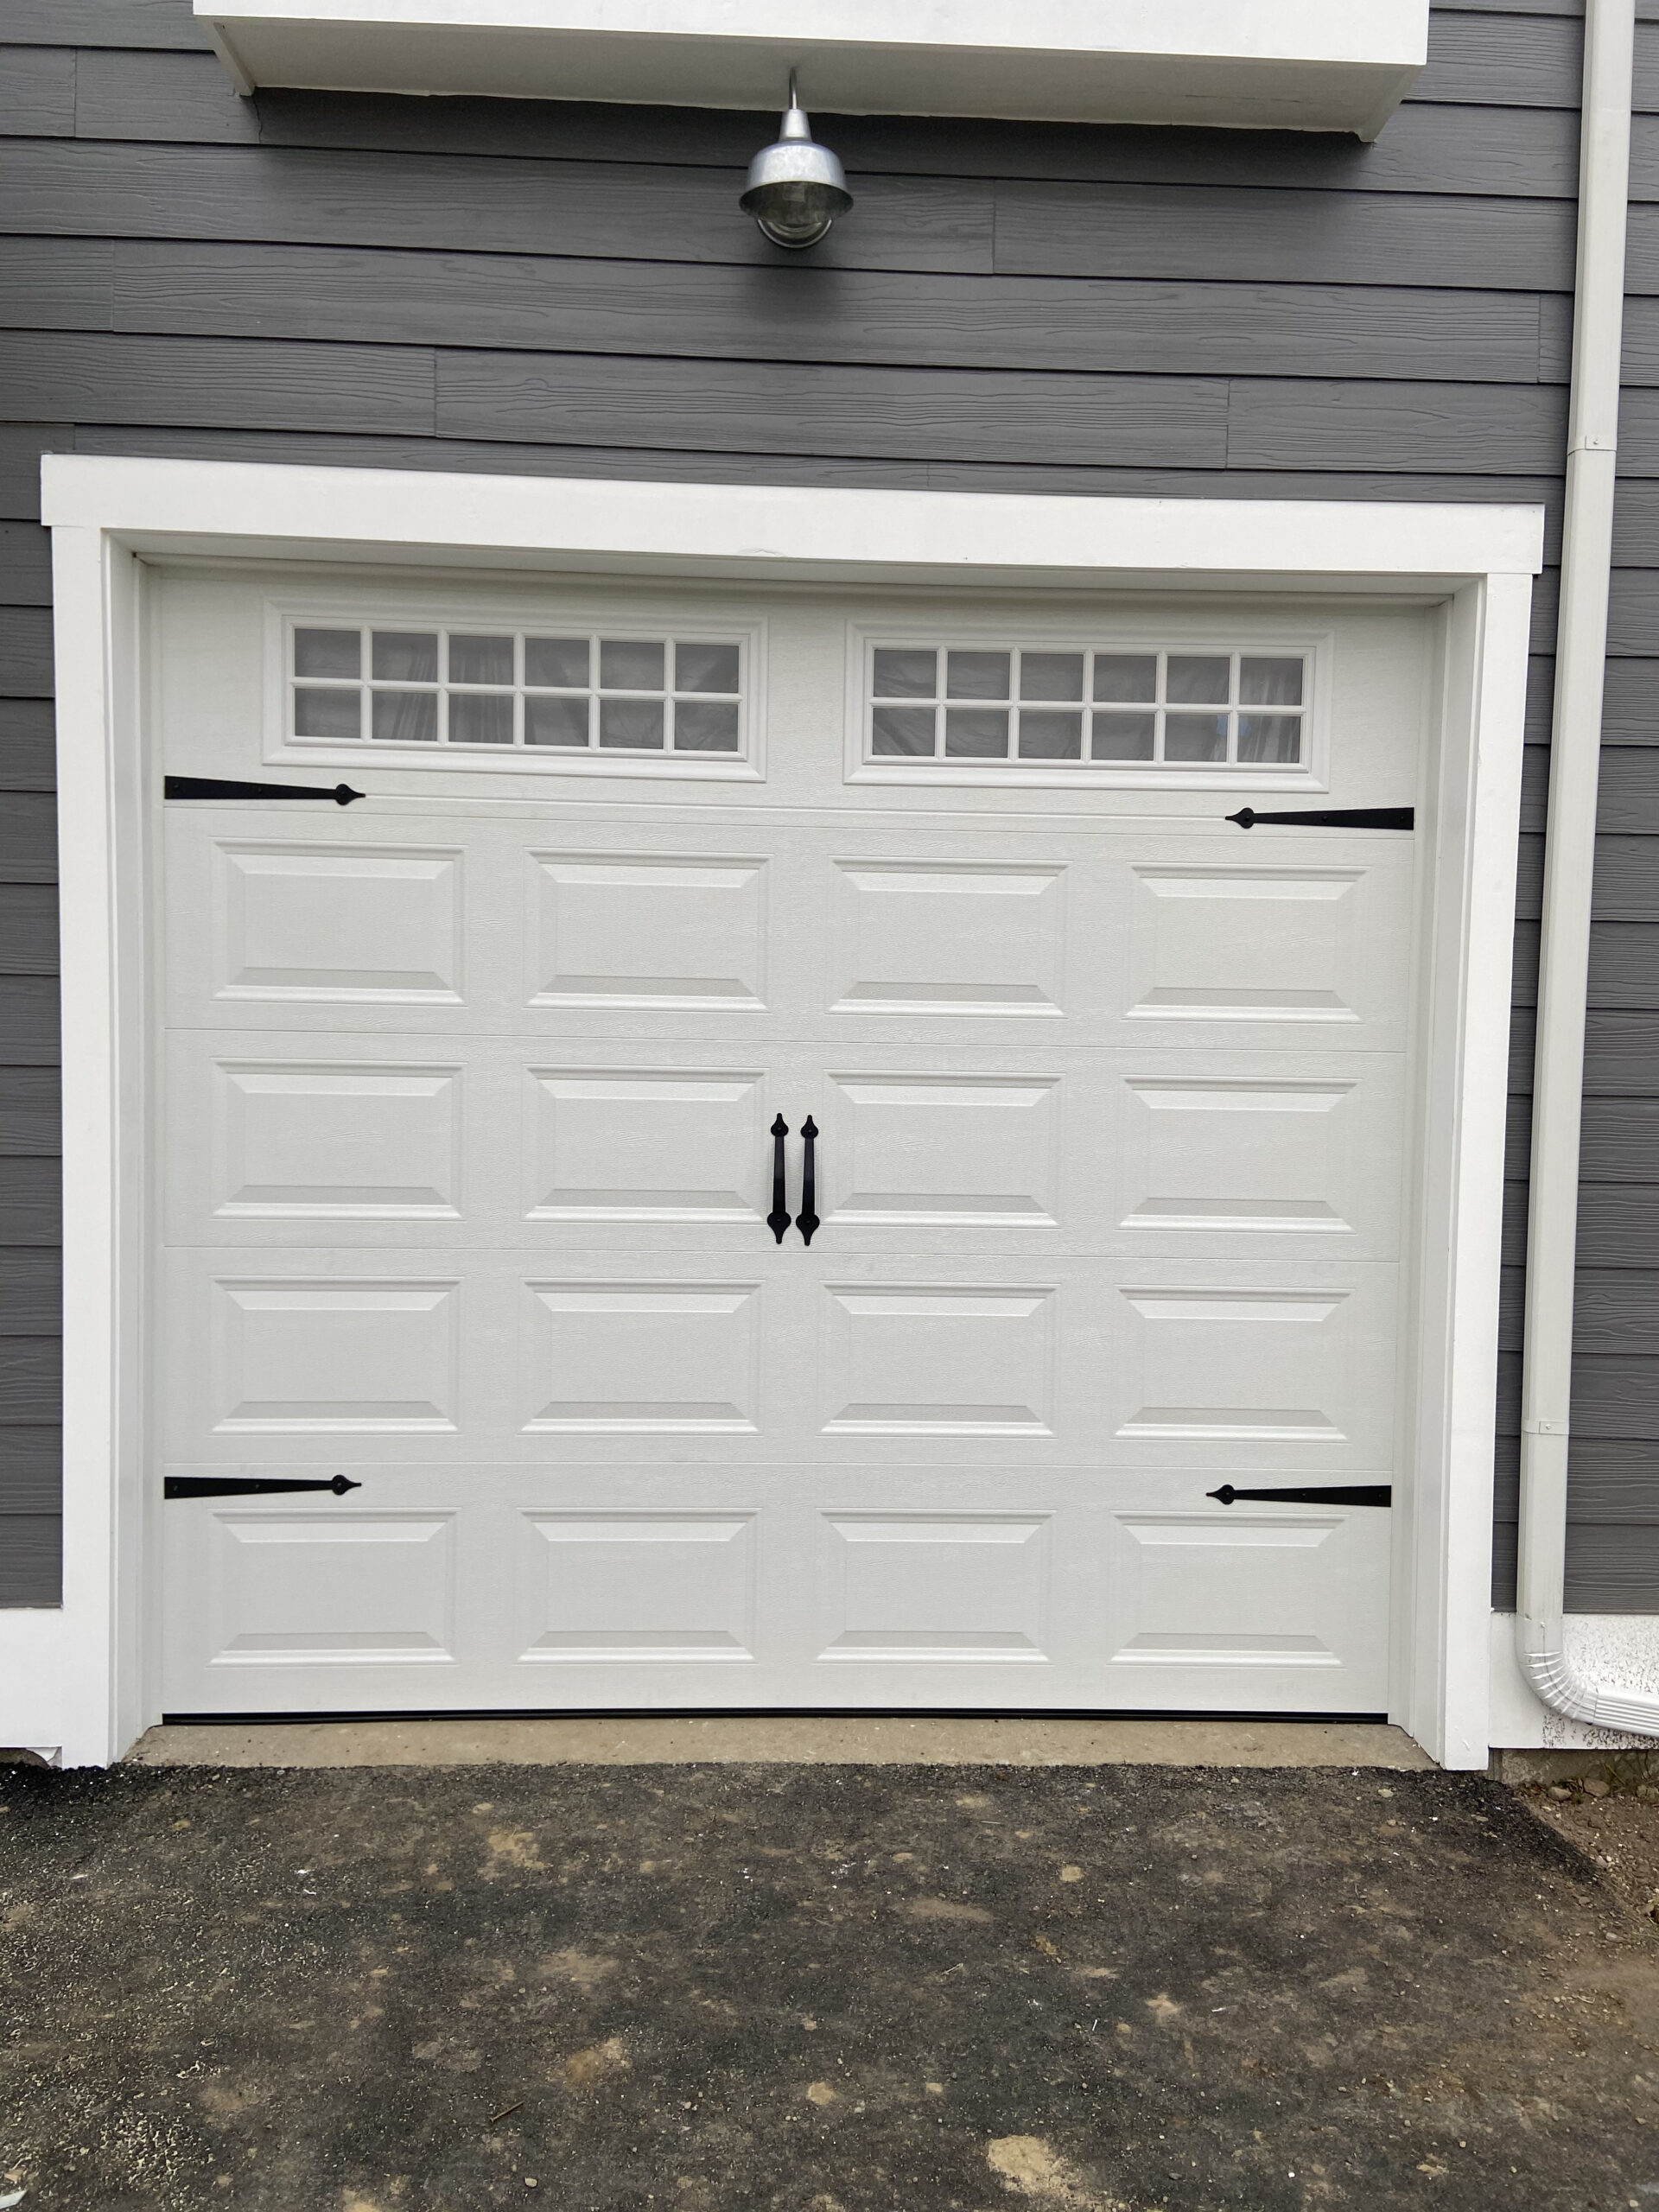 White garage door with black spade-shape handles and hinges and square windows, 